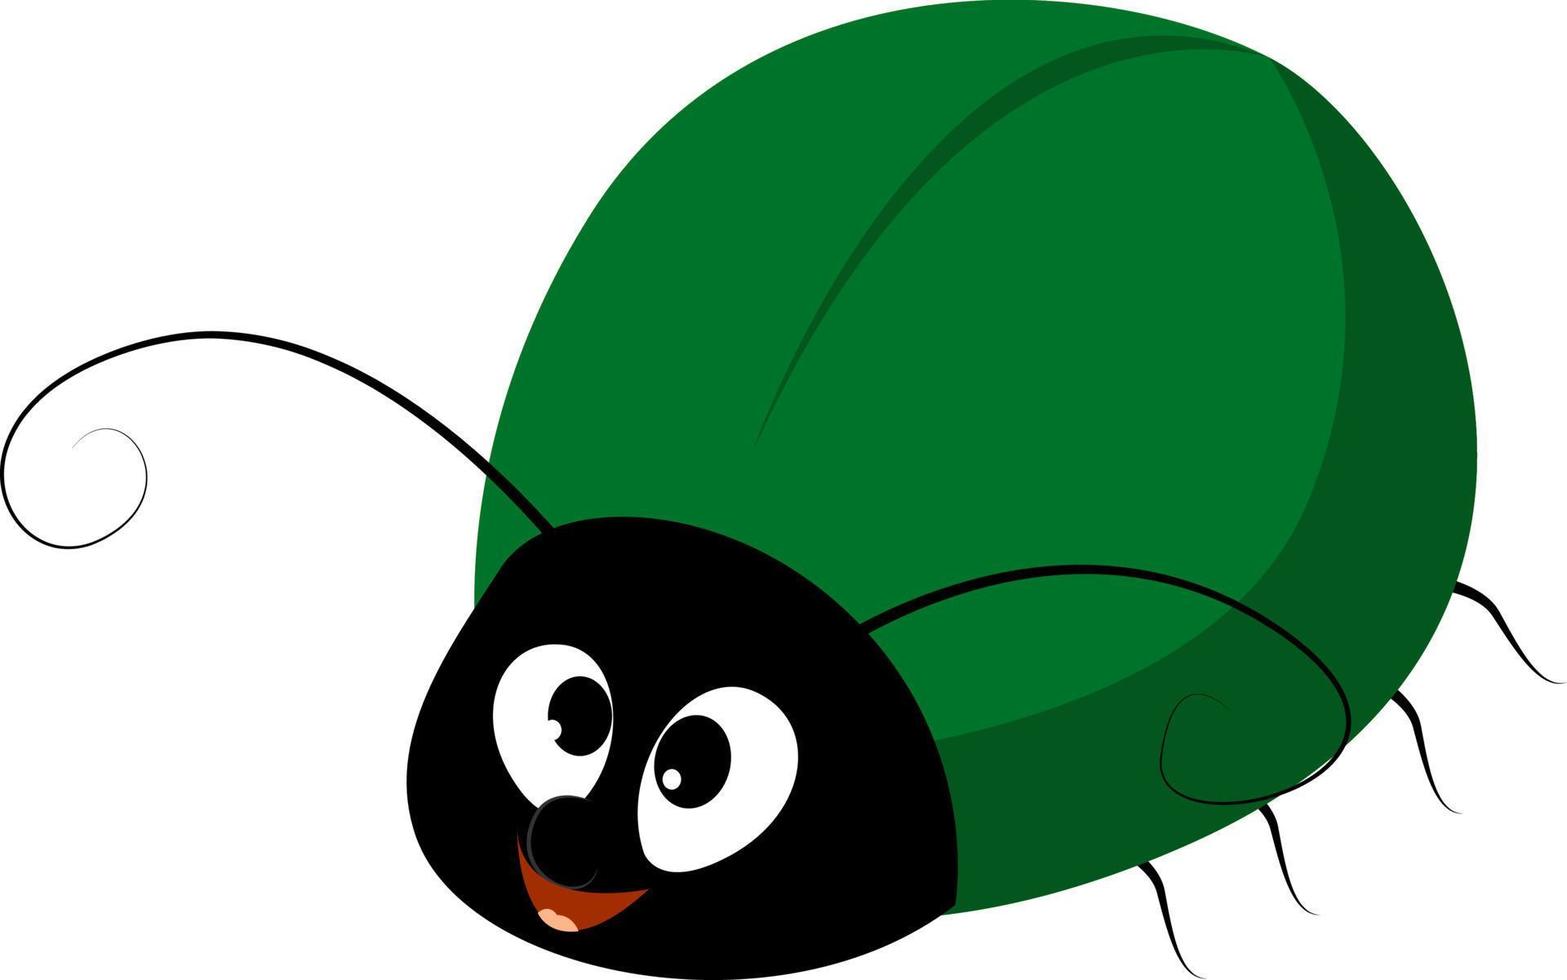 Green insect, illustration, vector on white background.